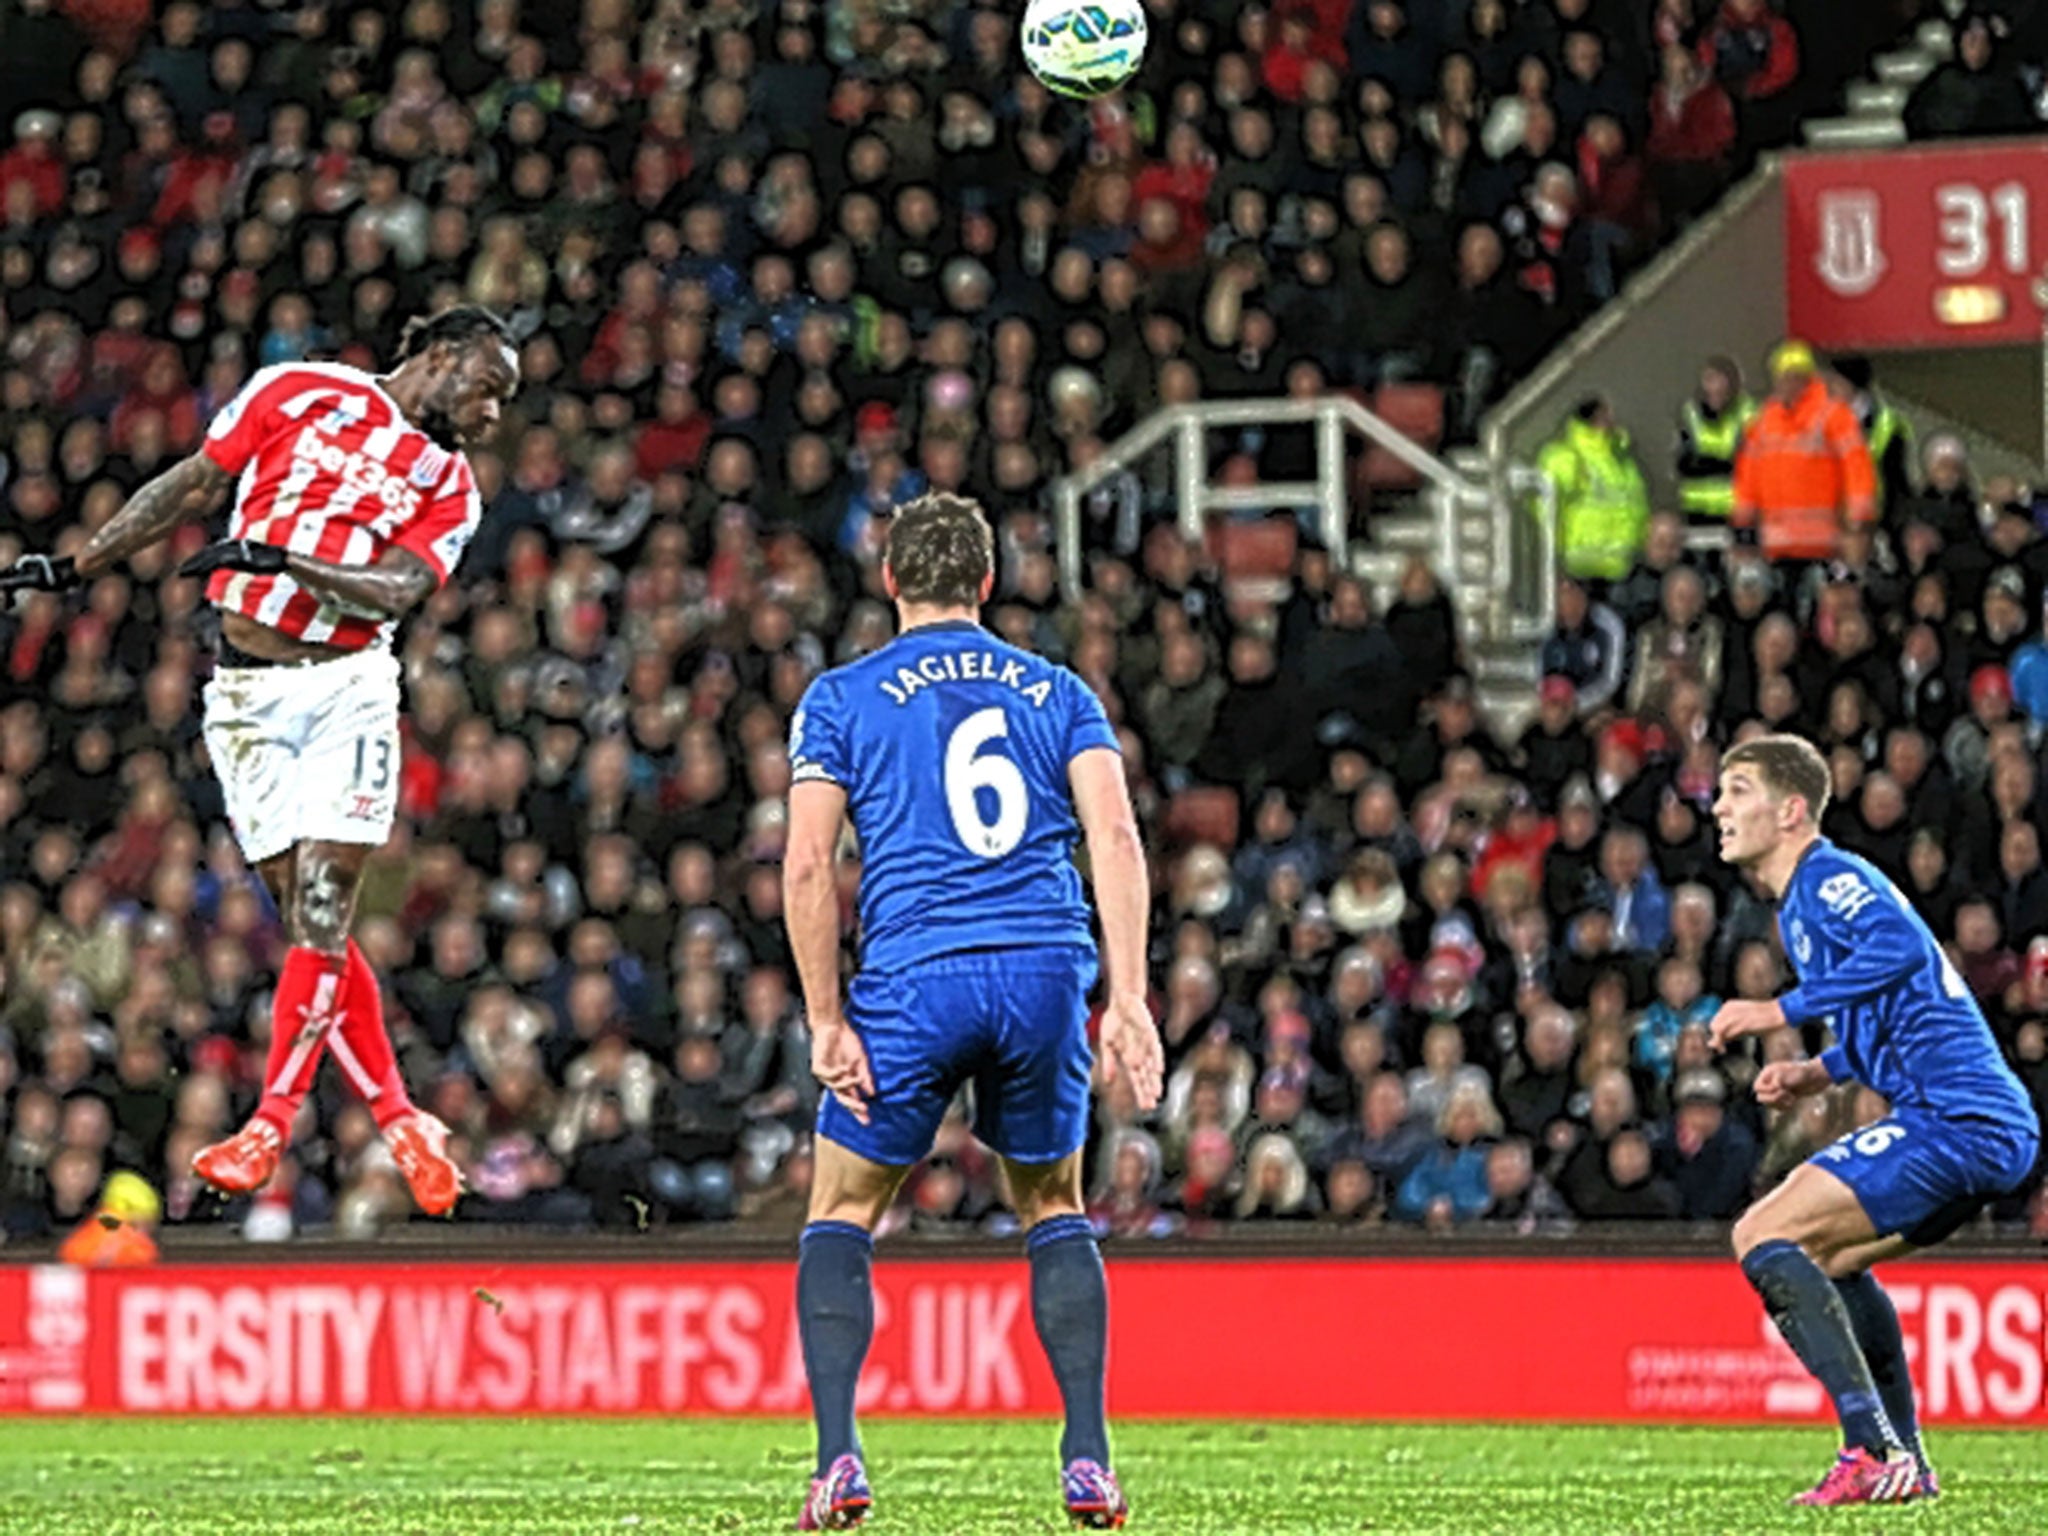 Victor Moses puts Stoke in front with a superb header